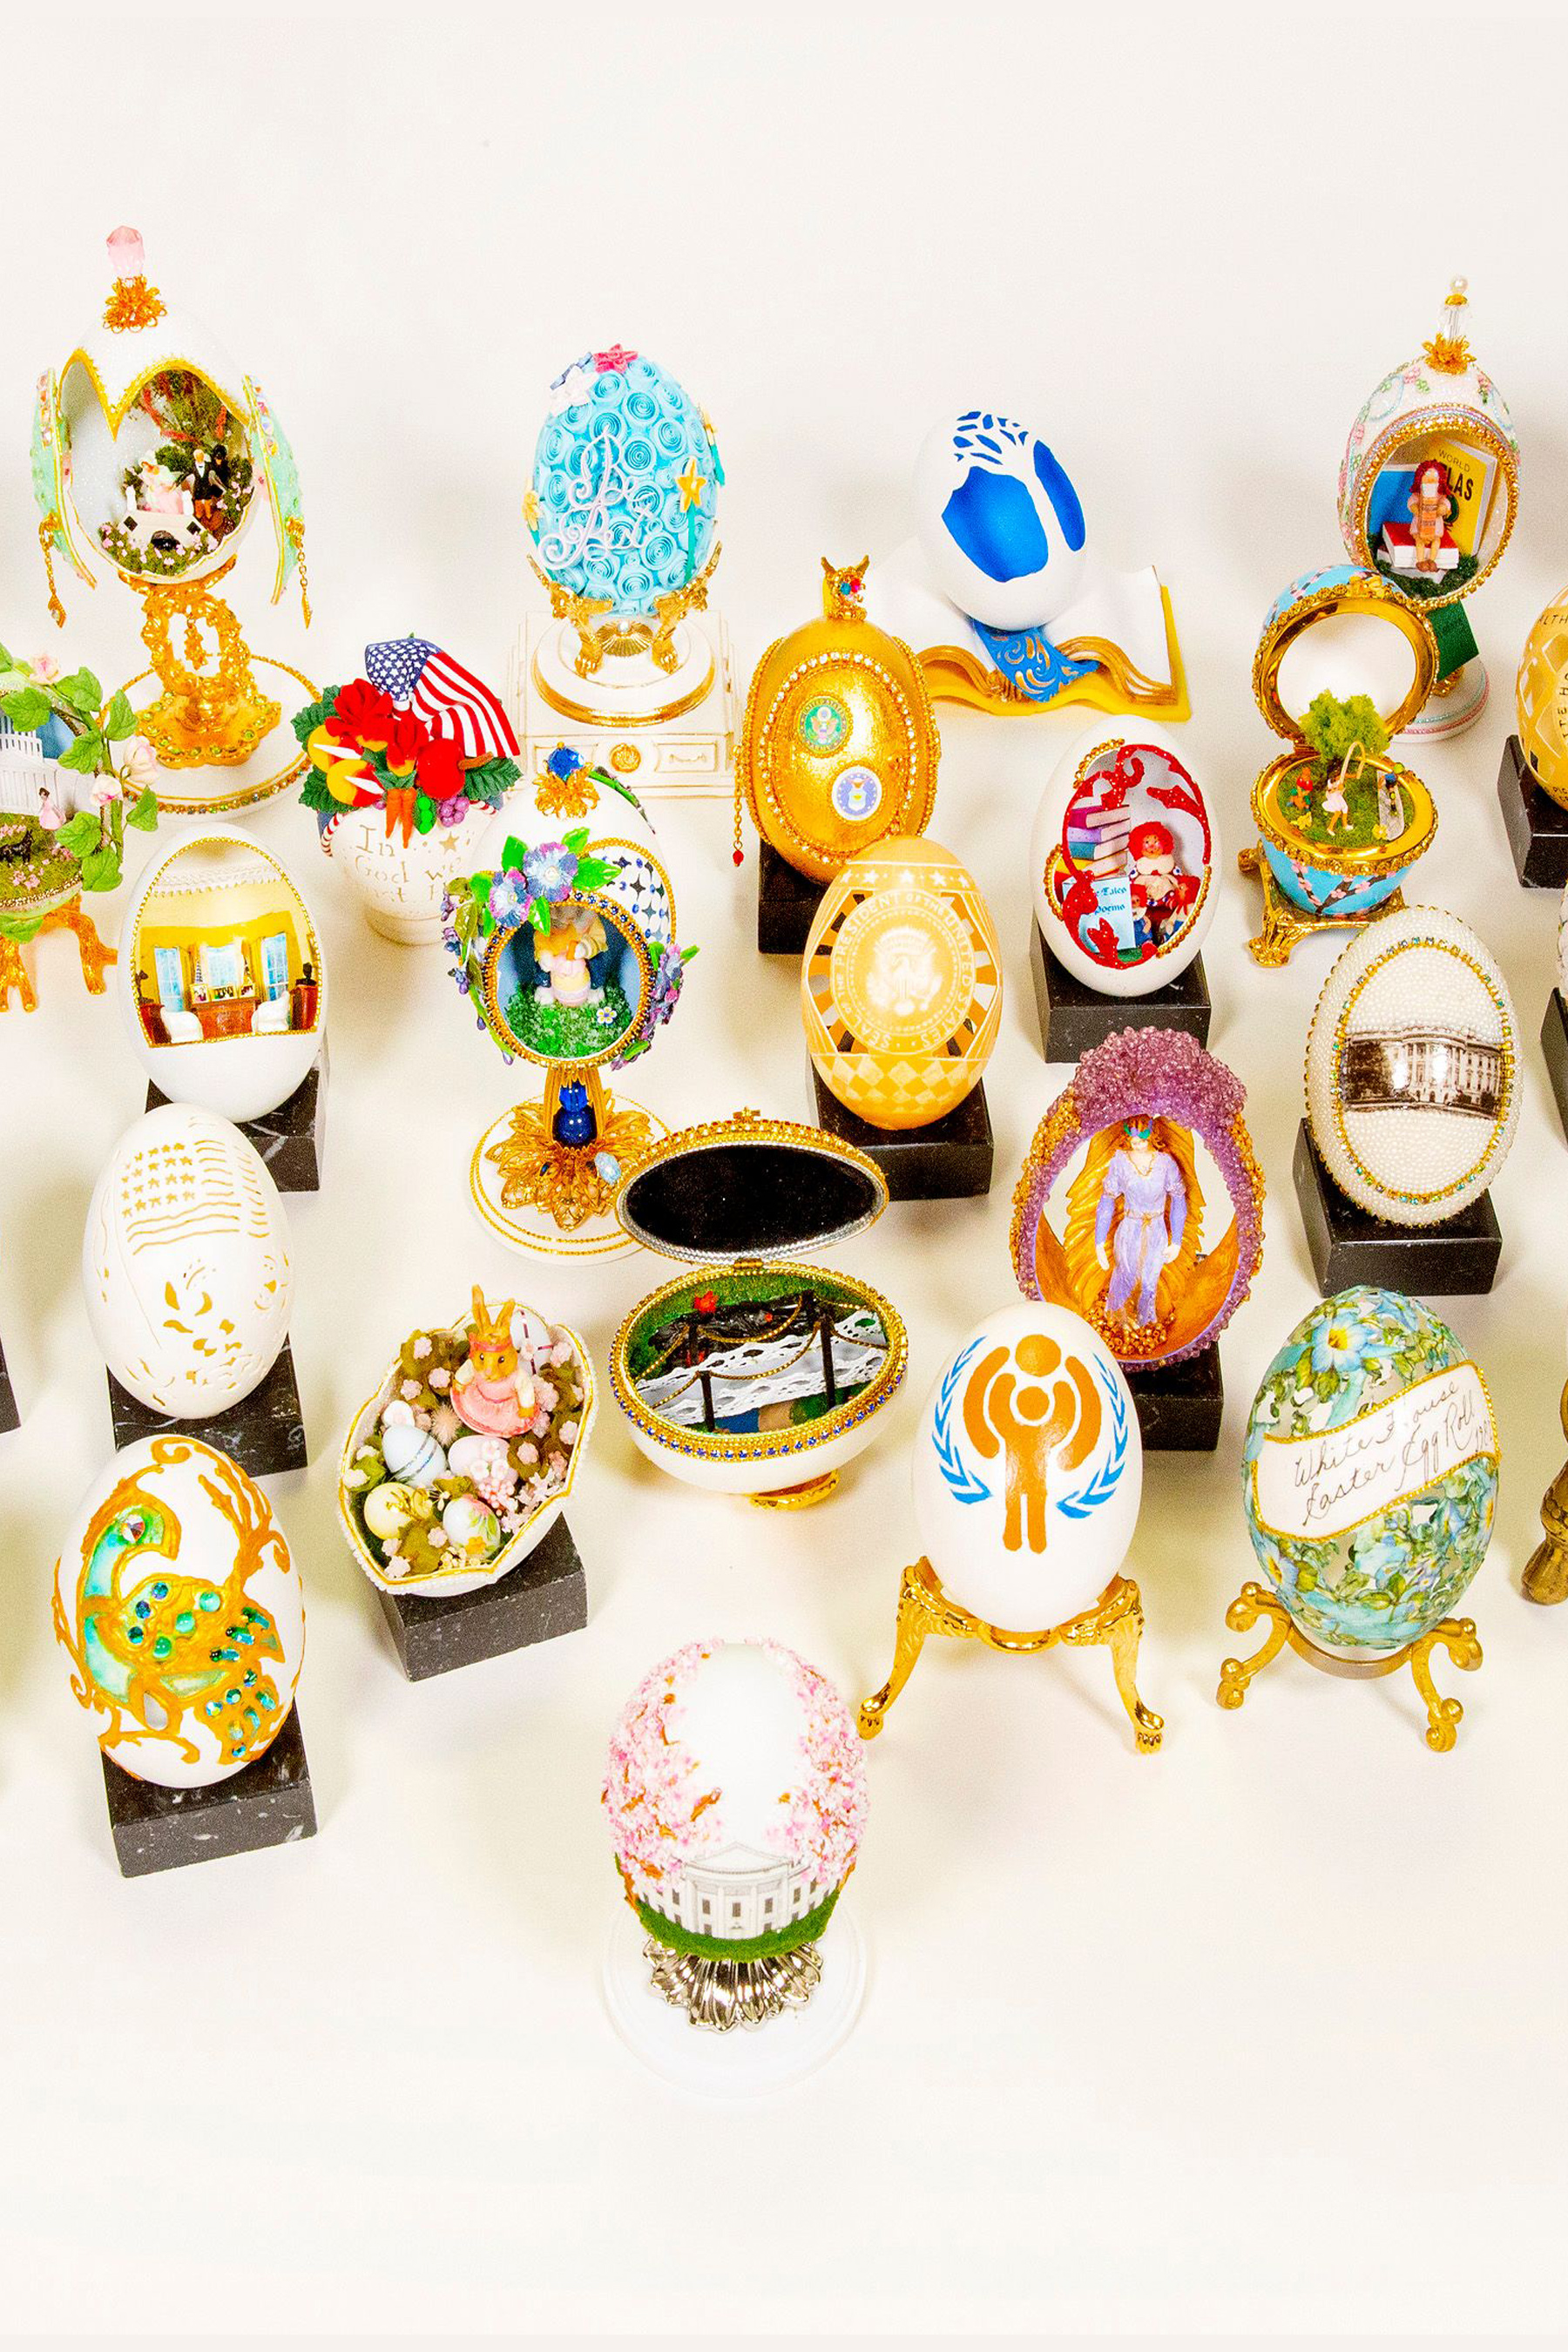 First Lady’s Commemorative Eggs through the years